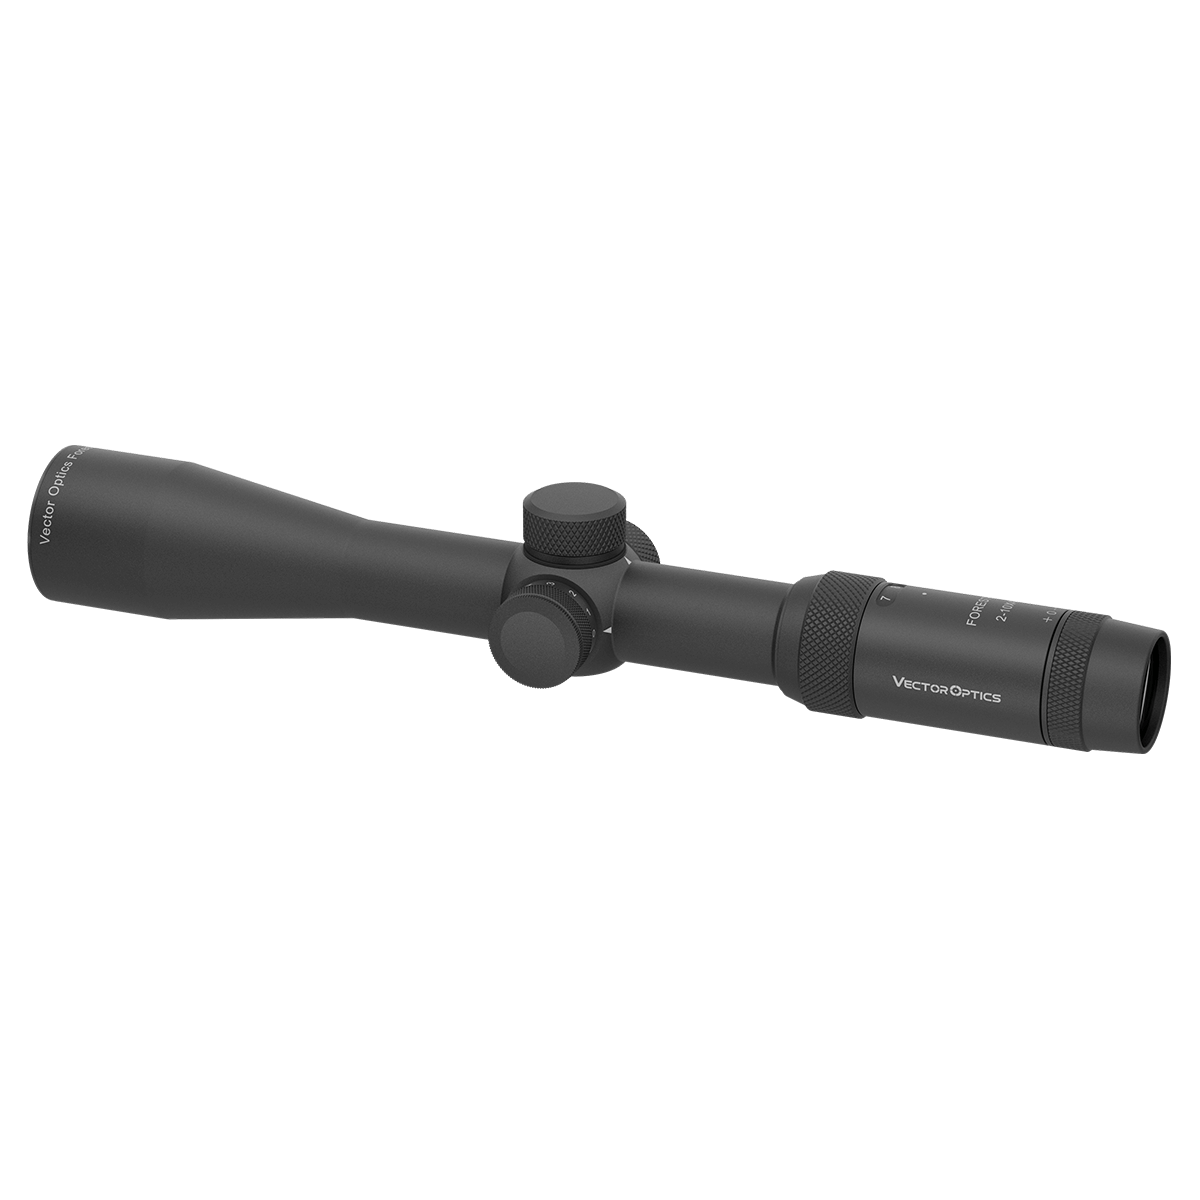 Forester 2-10x40SFP Riflescope-Rifle Scope & Red Dot Sight 